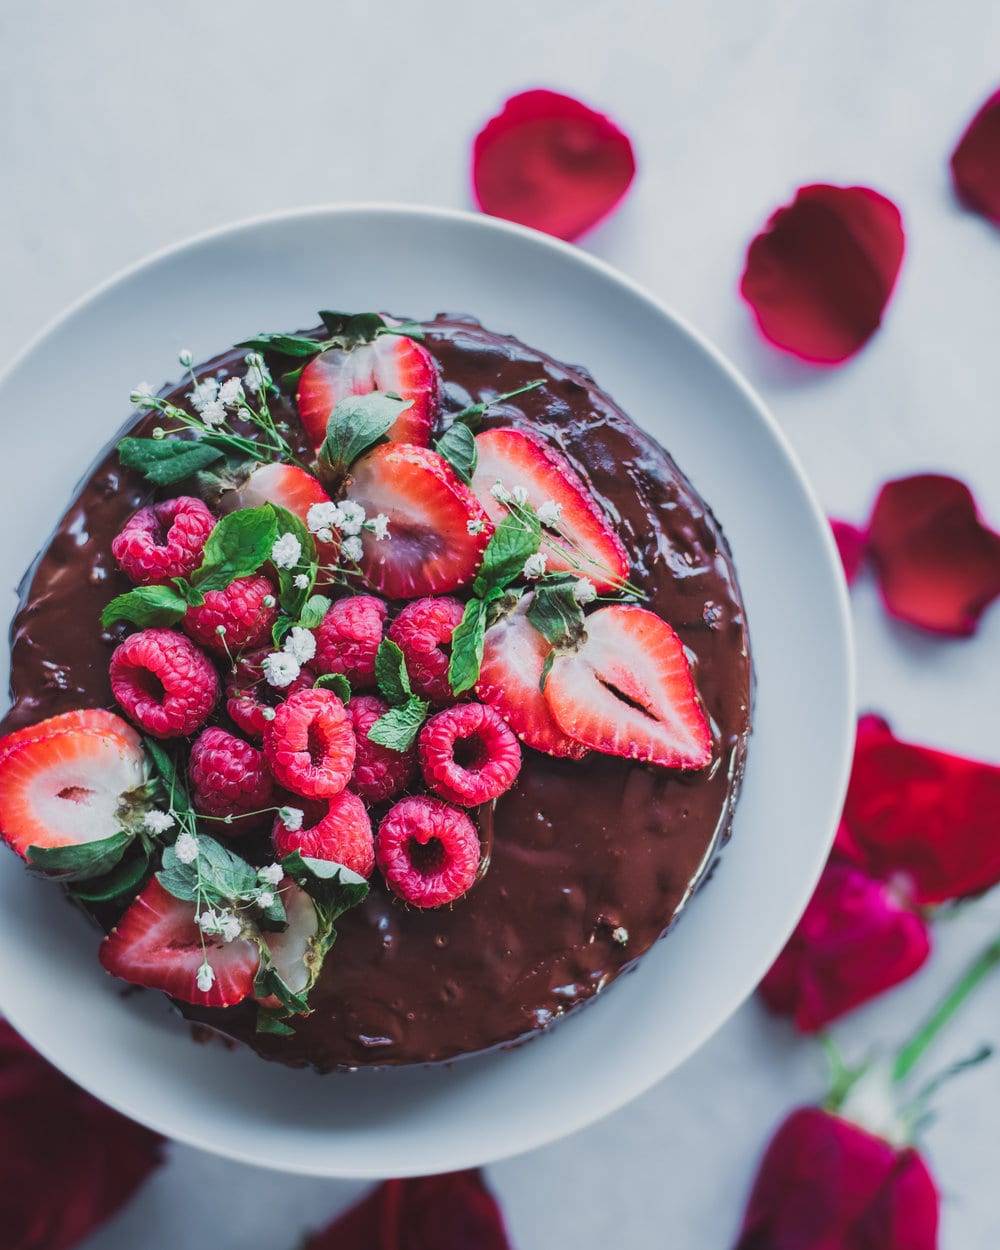 Chocolate caked topped with berries on a white plate next to rose petals.